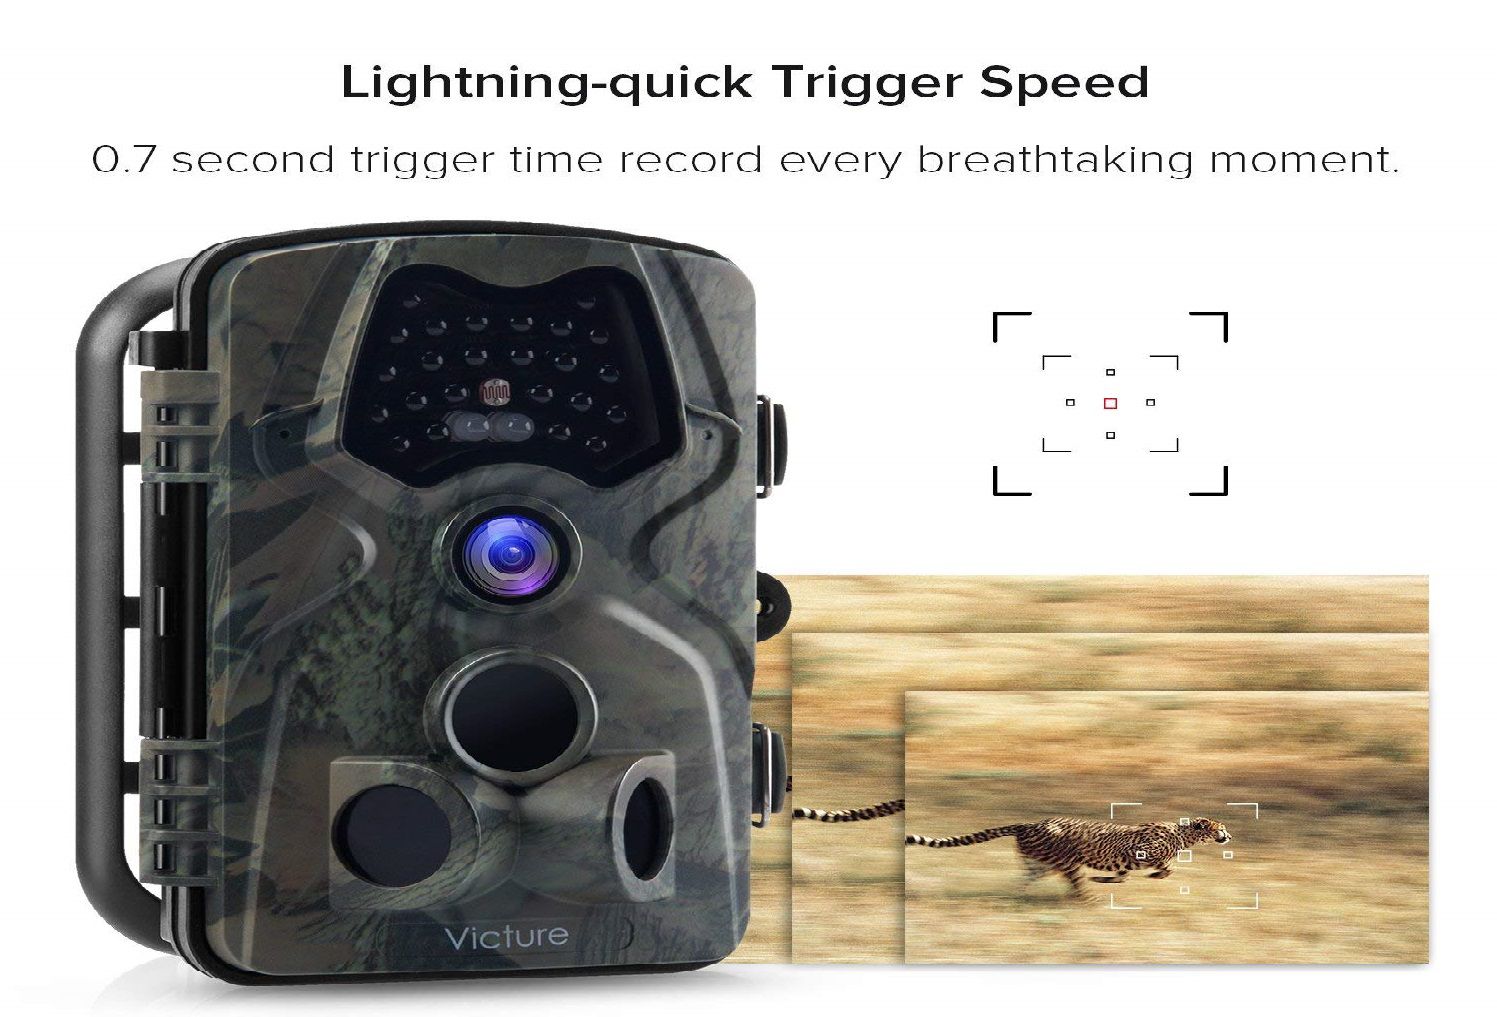 Victure Trail Camera 1080P 12MP Wildlife Camera Review